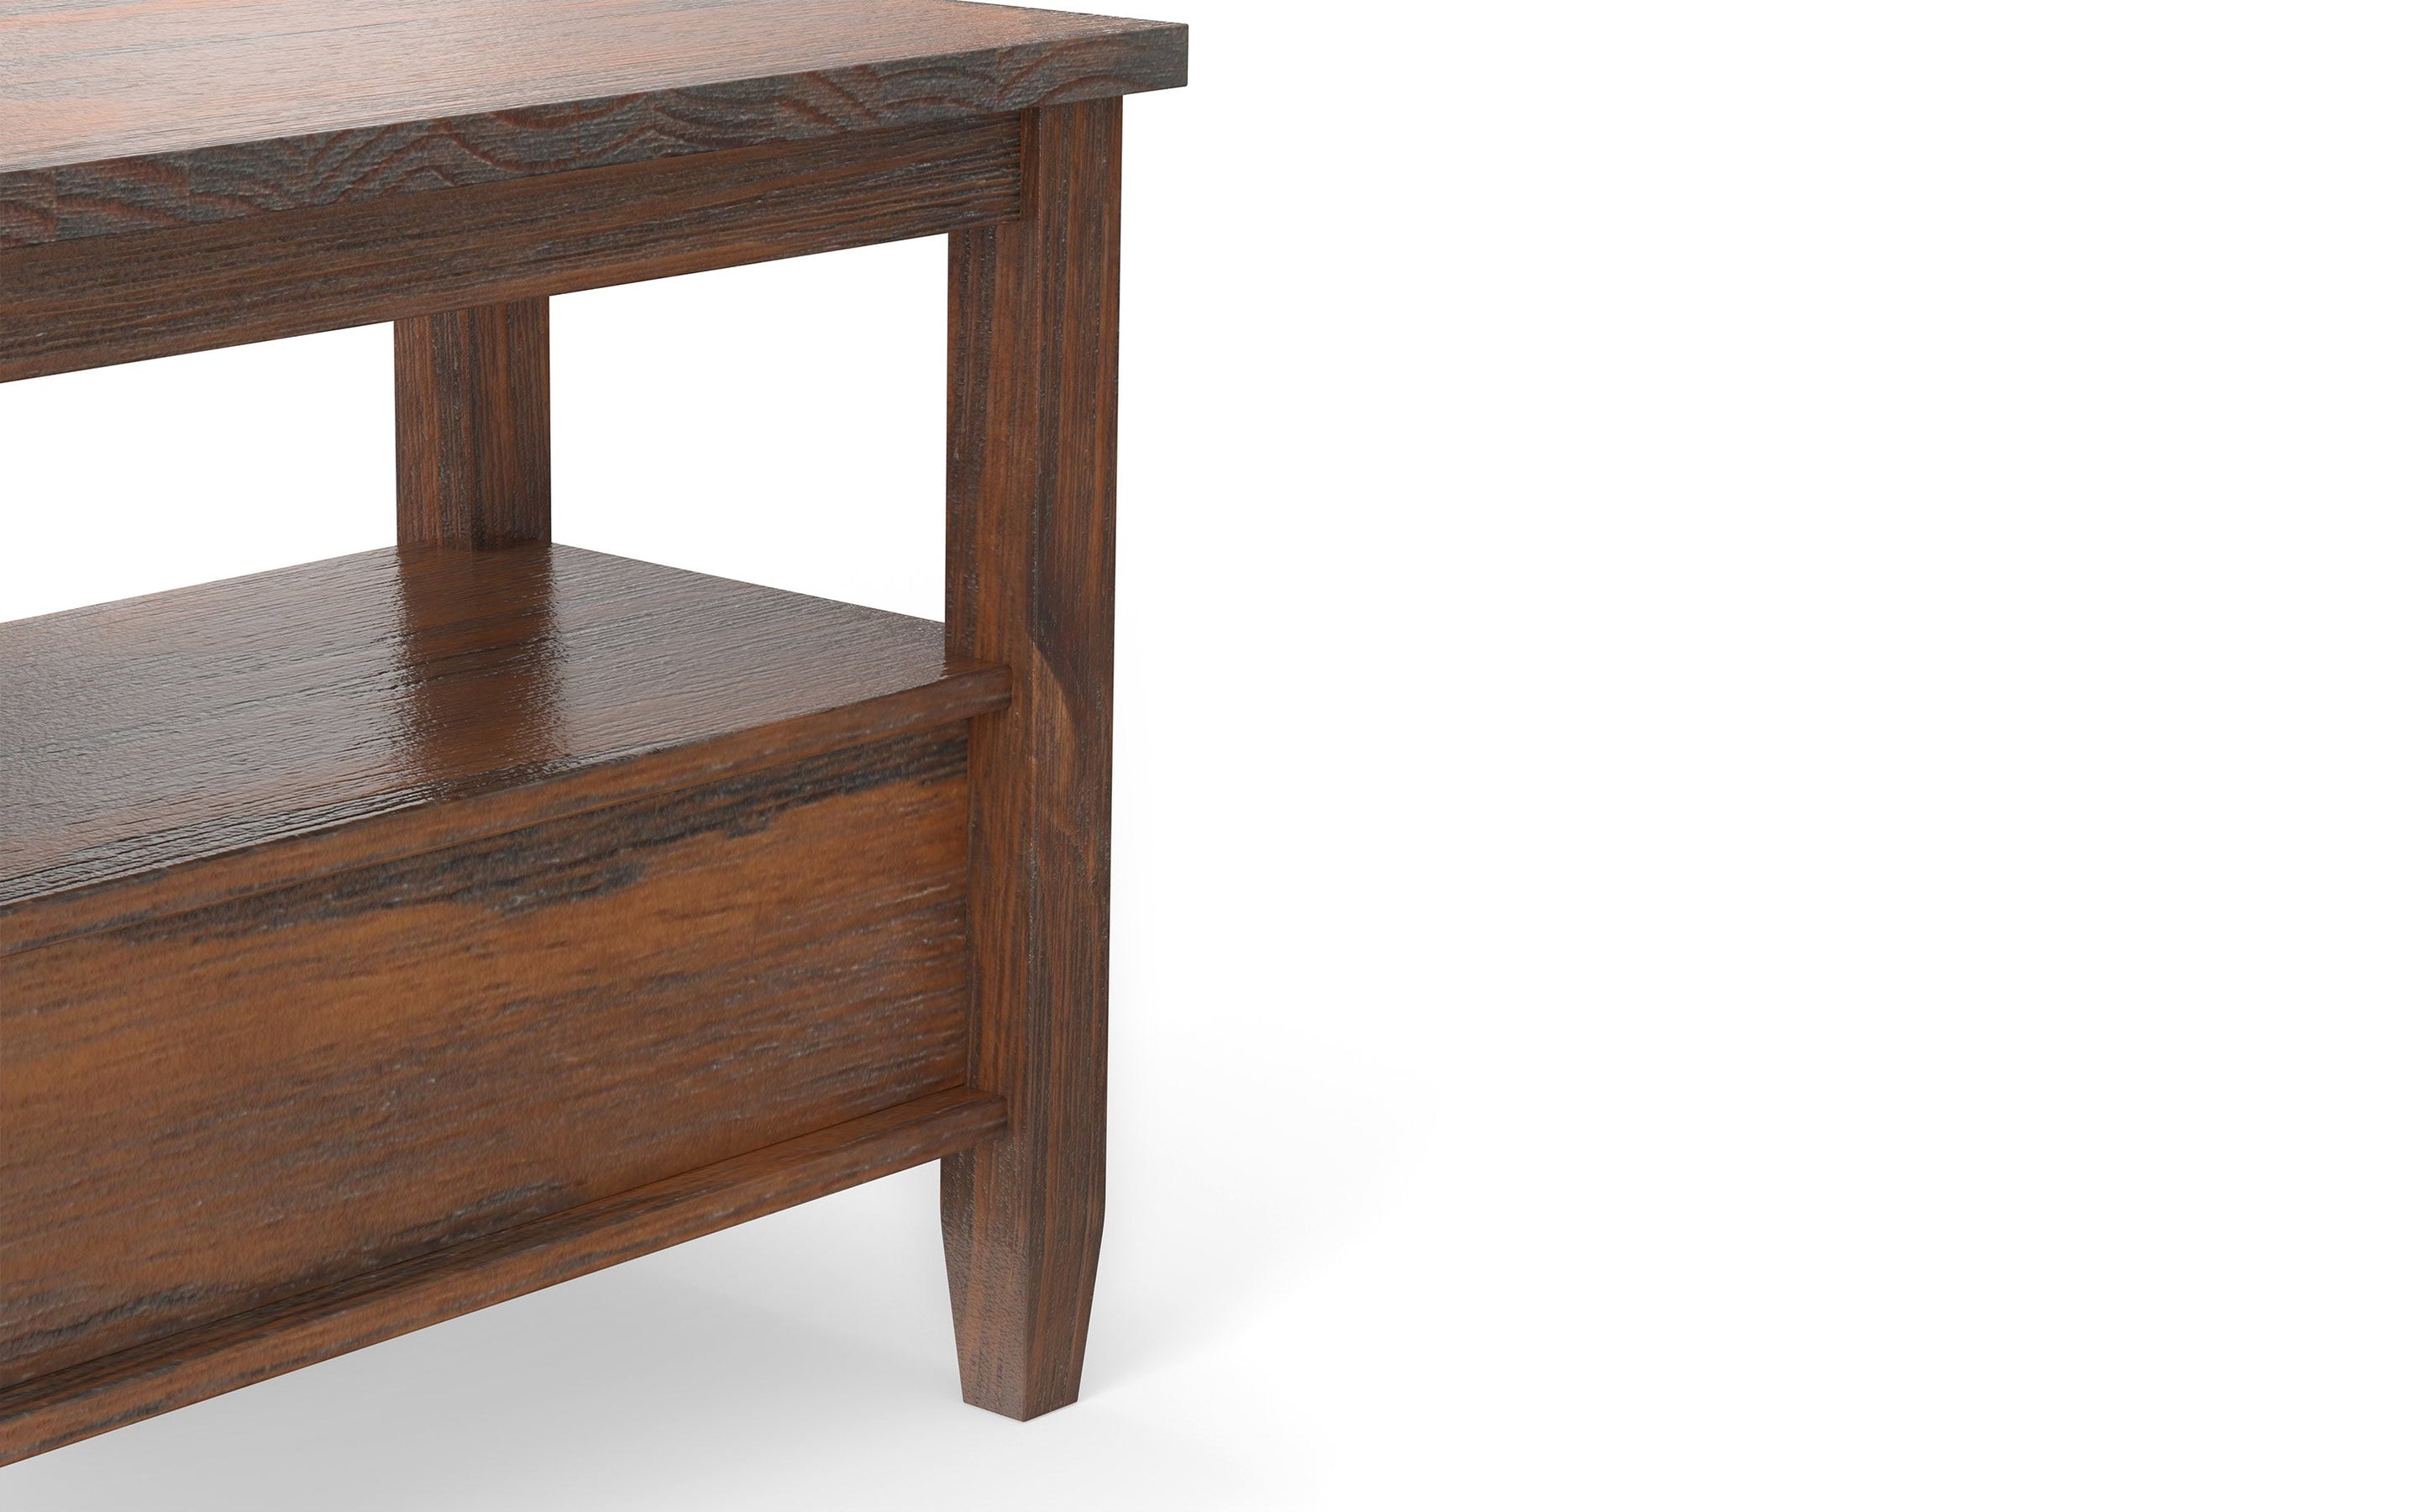 Distressed Charcoal Brown | Warm Shaker Narrow Side Table